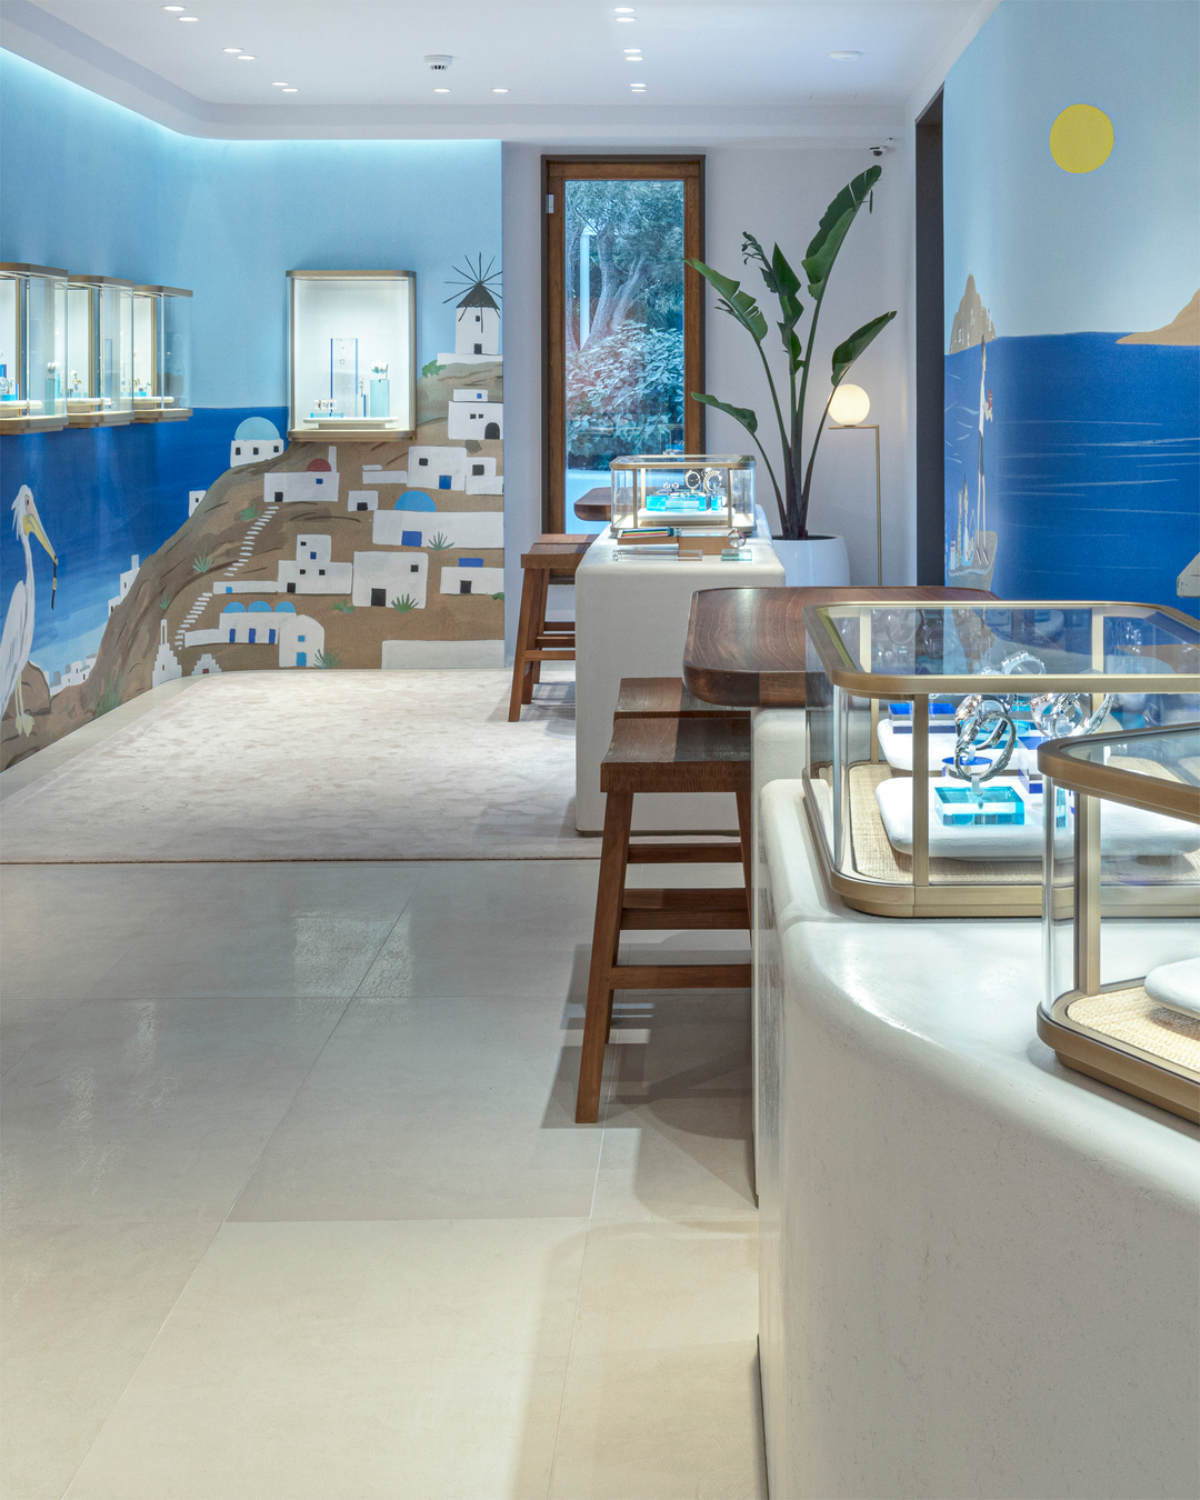 Cartier Arrives In East Hampton And Mykonos For The Summer Season